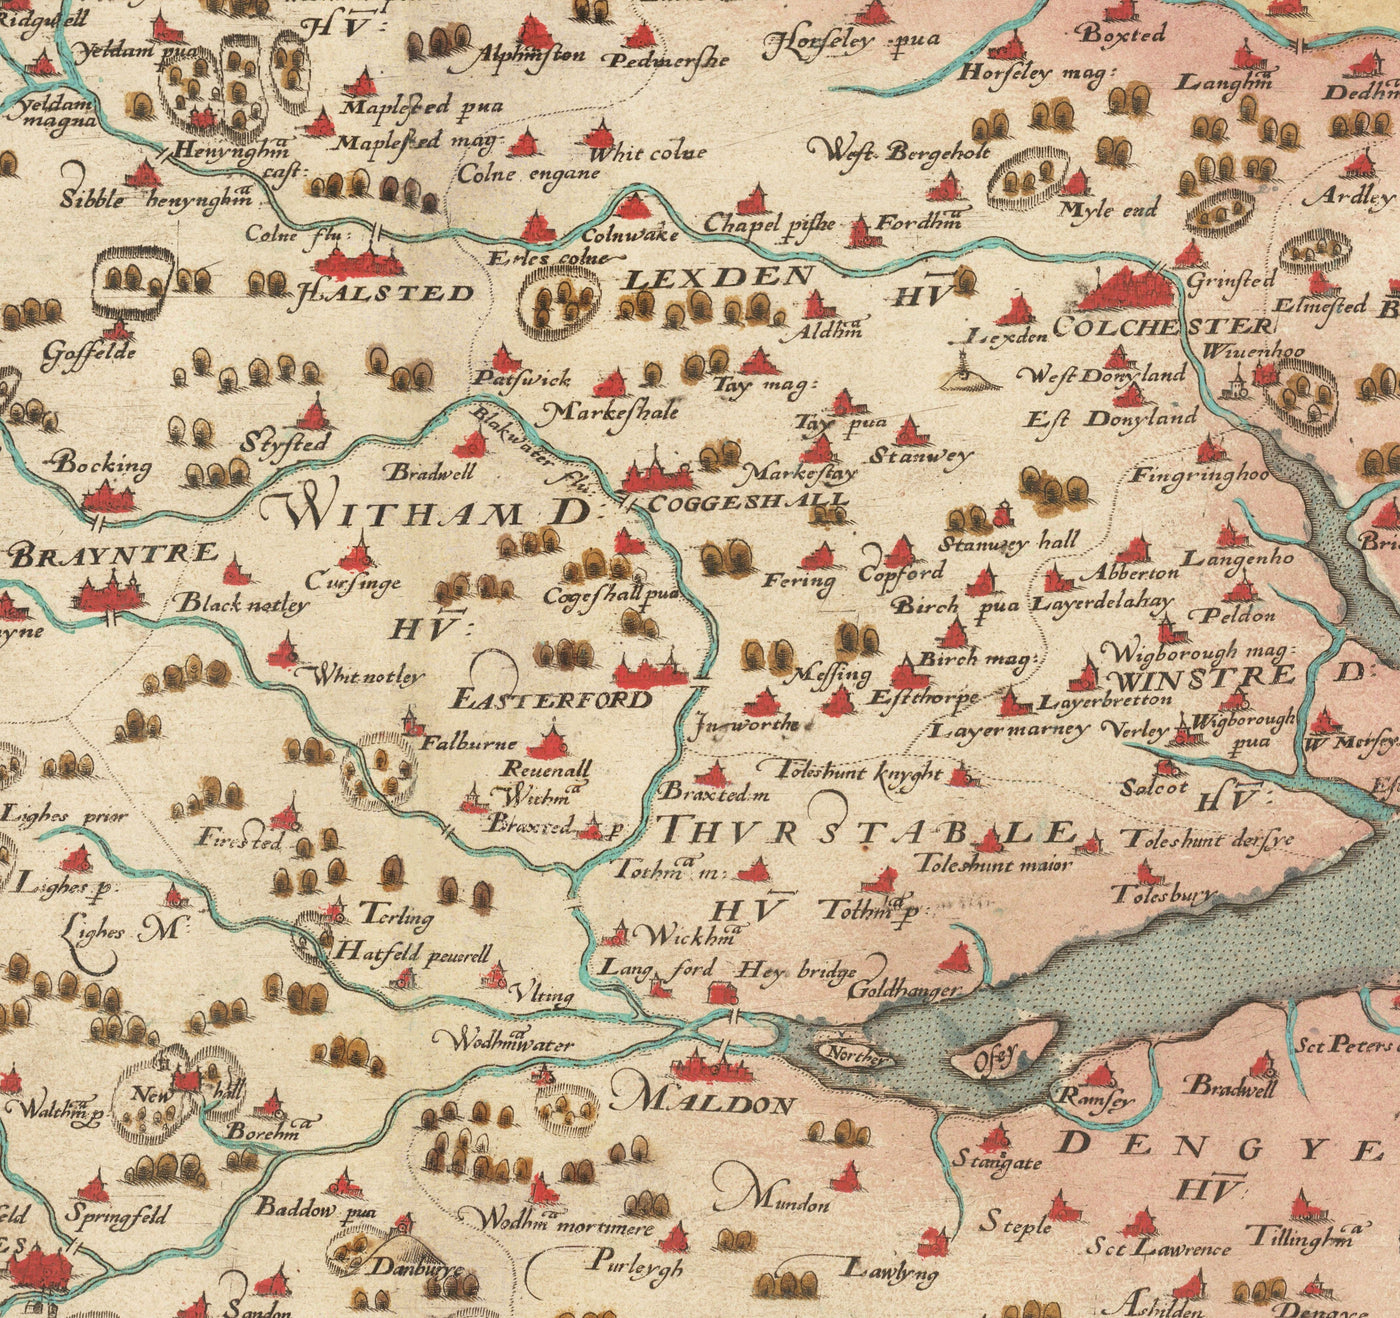 Old Map of Essex 1579 by Christopher Saxton - First Map of Essex -  Southend, Colchester, Chelmsford, Romford, Dagenham, Brentwood